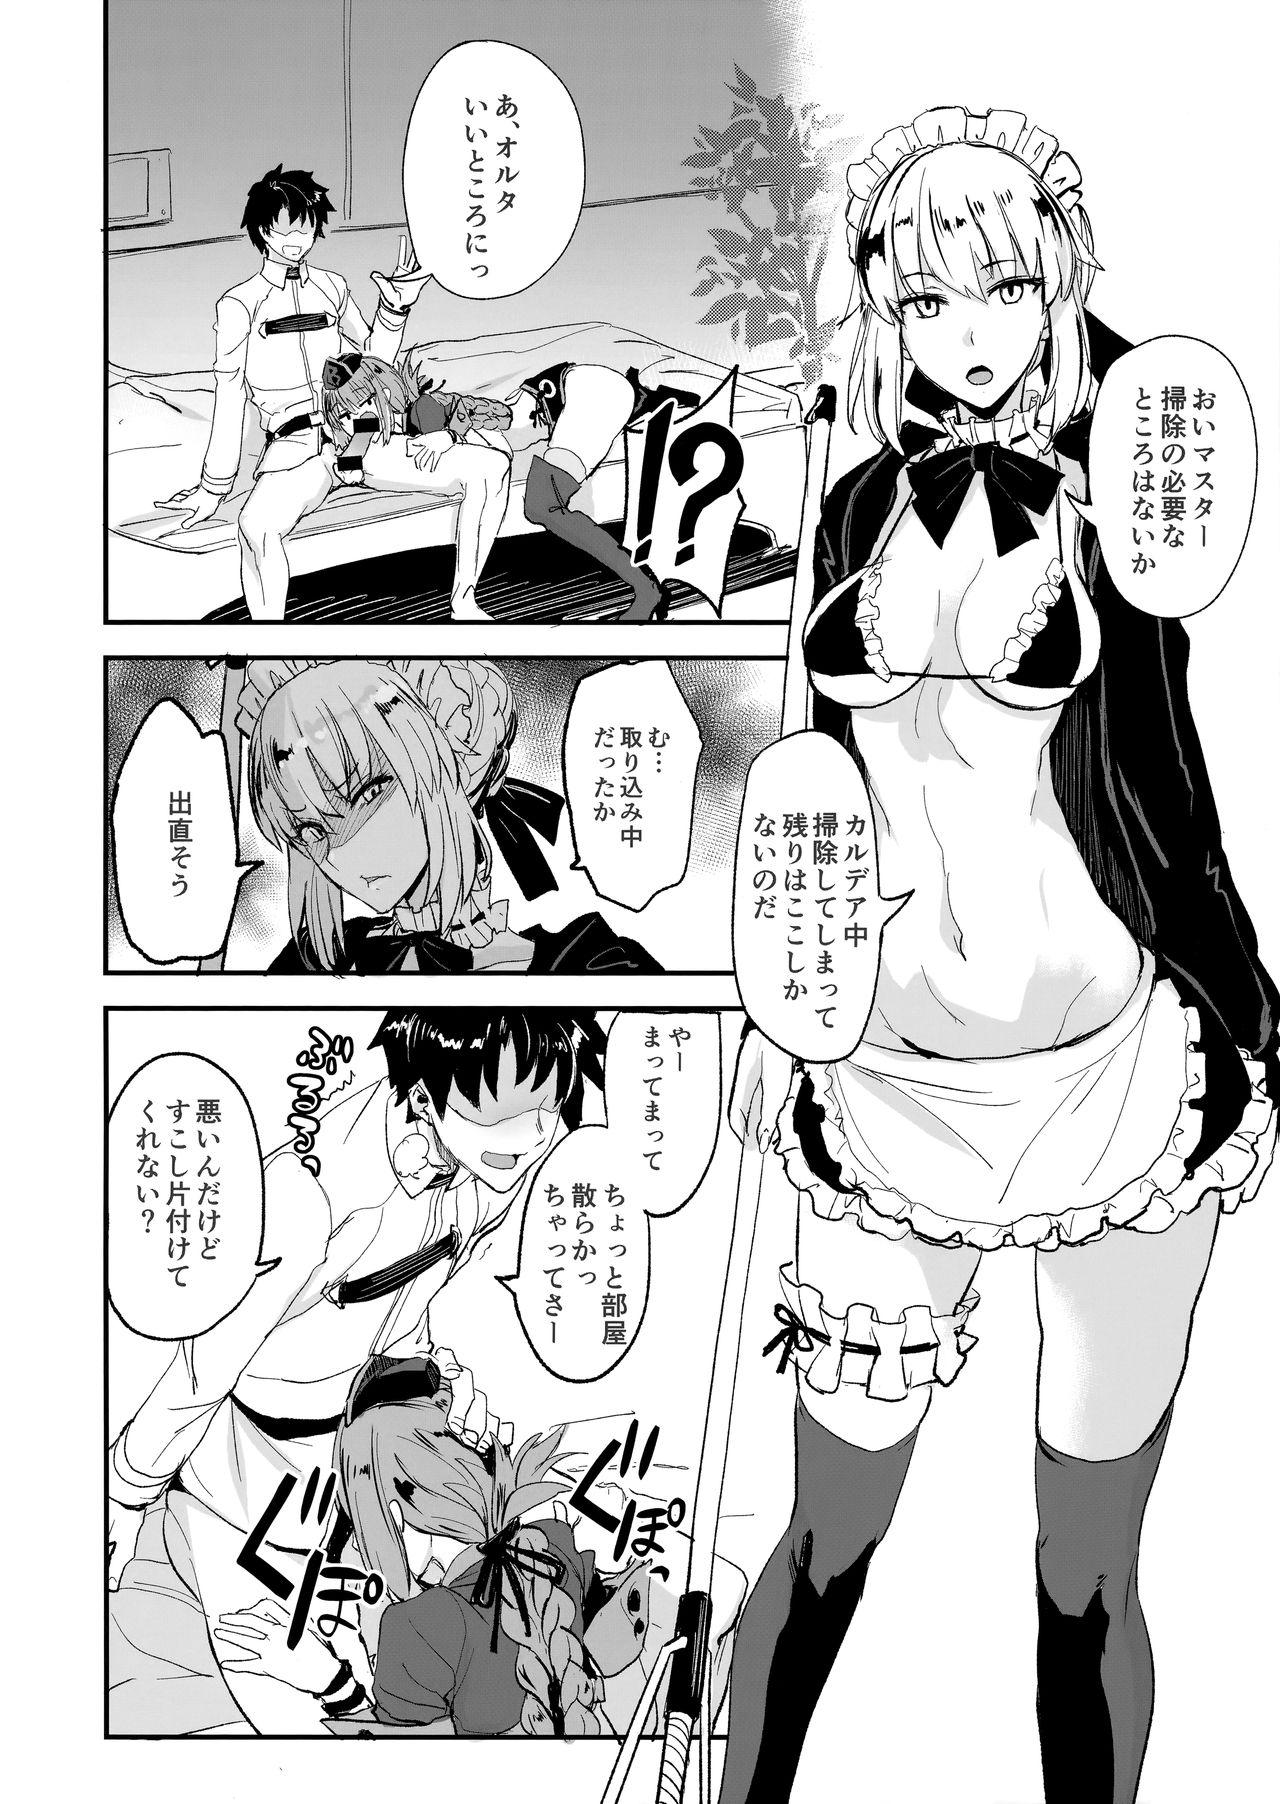 Atm FGO no Erohon 2 - Fate grand order Hairy Pussy - Page 5